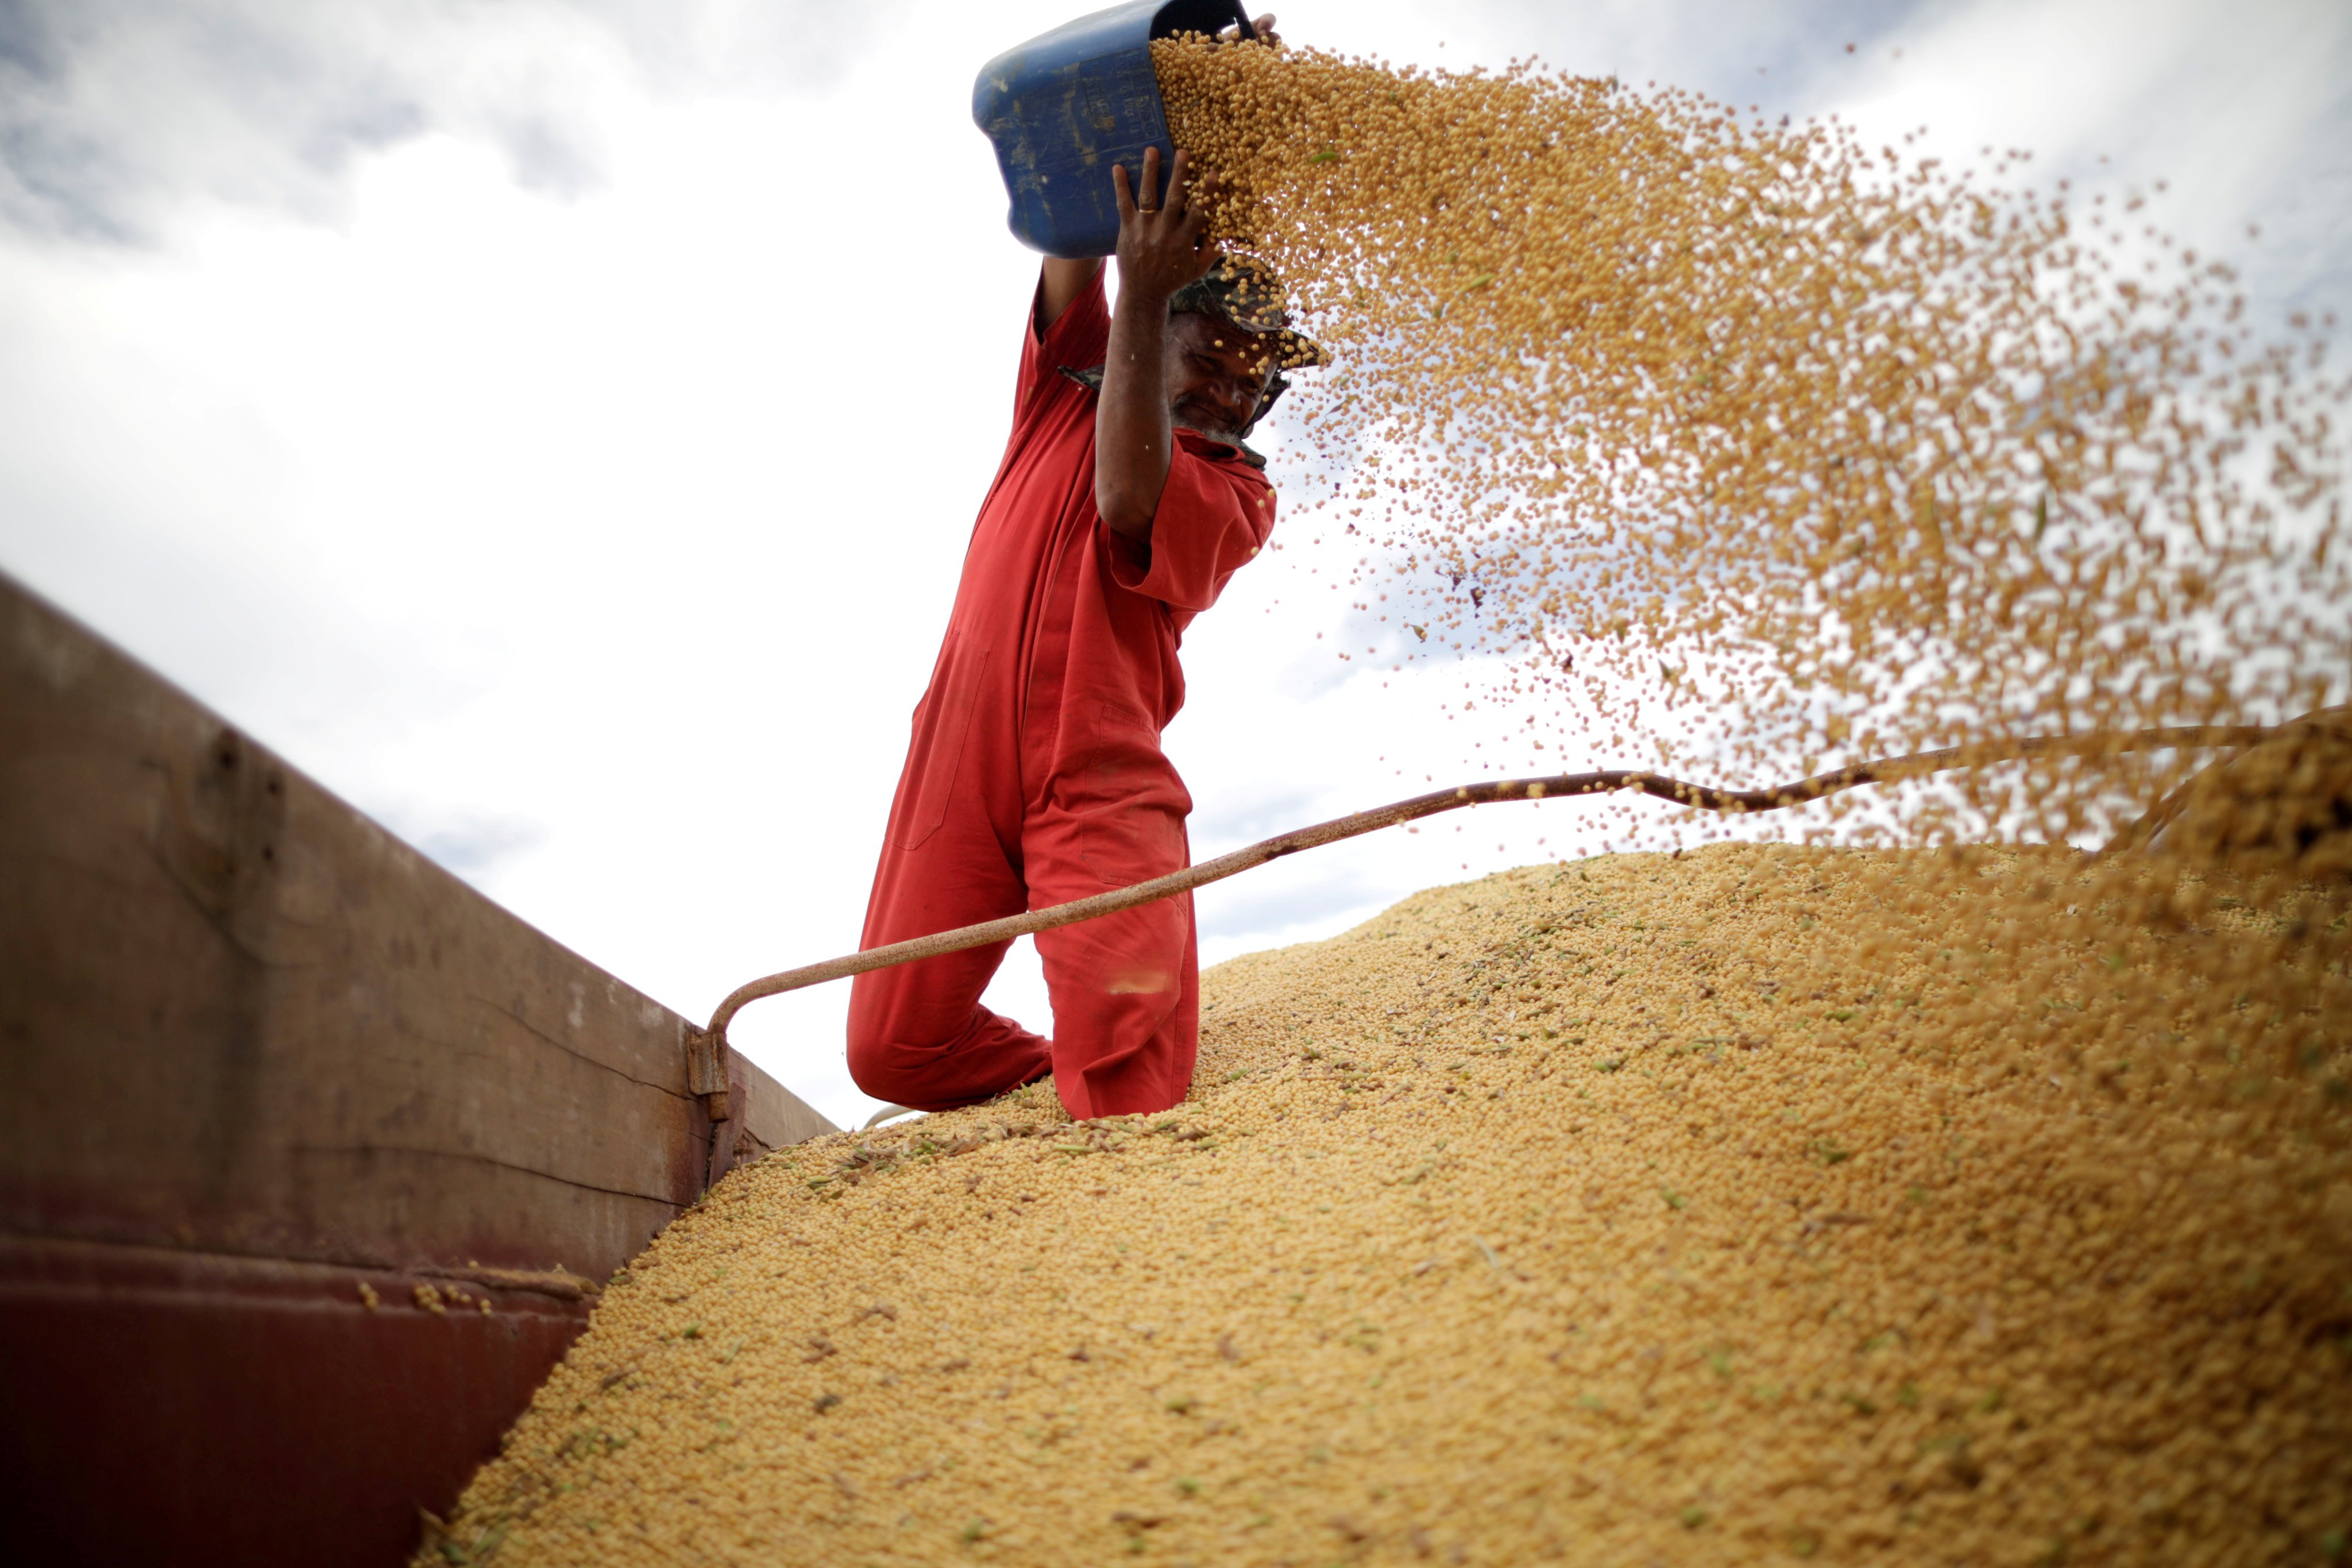 Beijing has been working in recent years to increase its self-reliance for soybeans and corn. Photo: Reuters